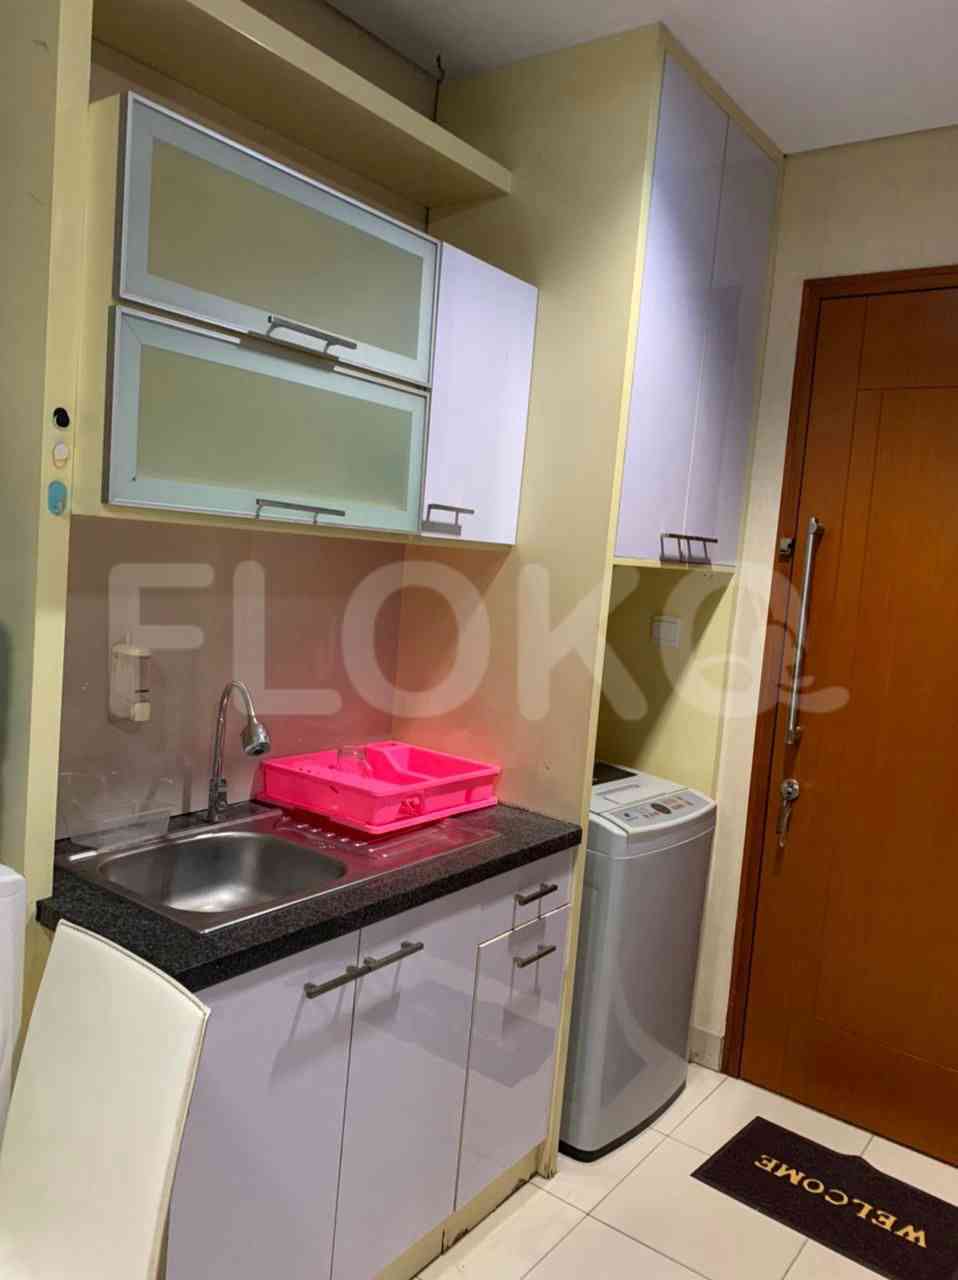 1 Bedroom on 6th Floor for Rent in Kuningan Place Apartment - fkued1 8